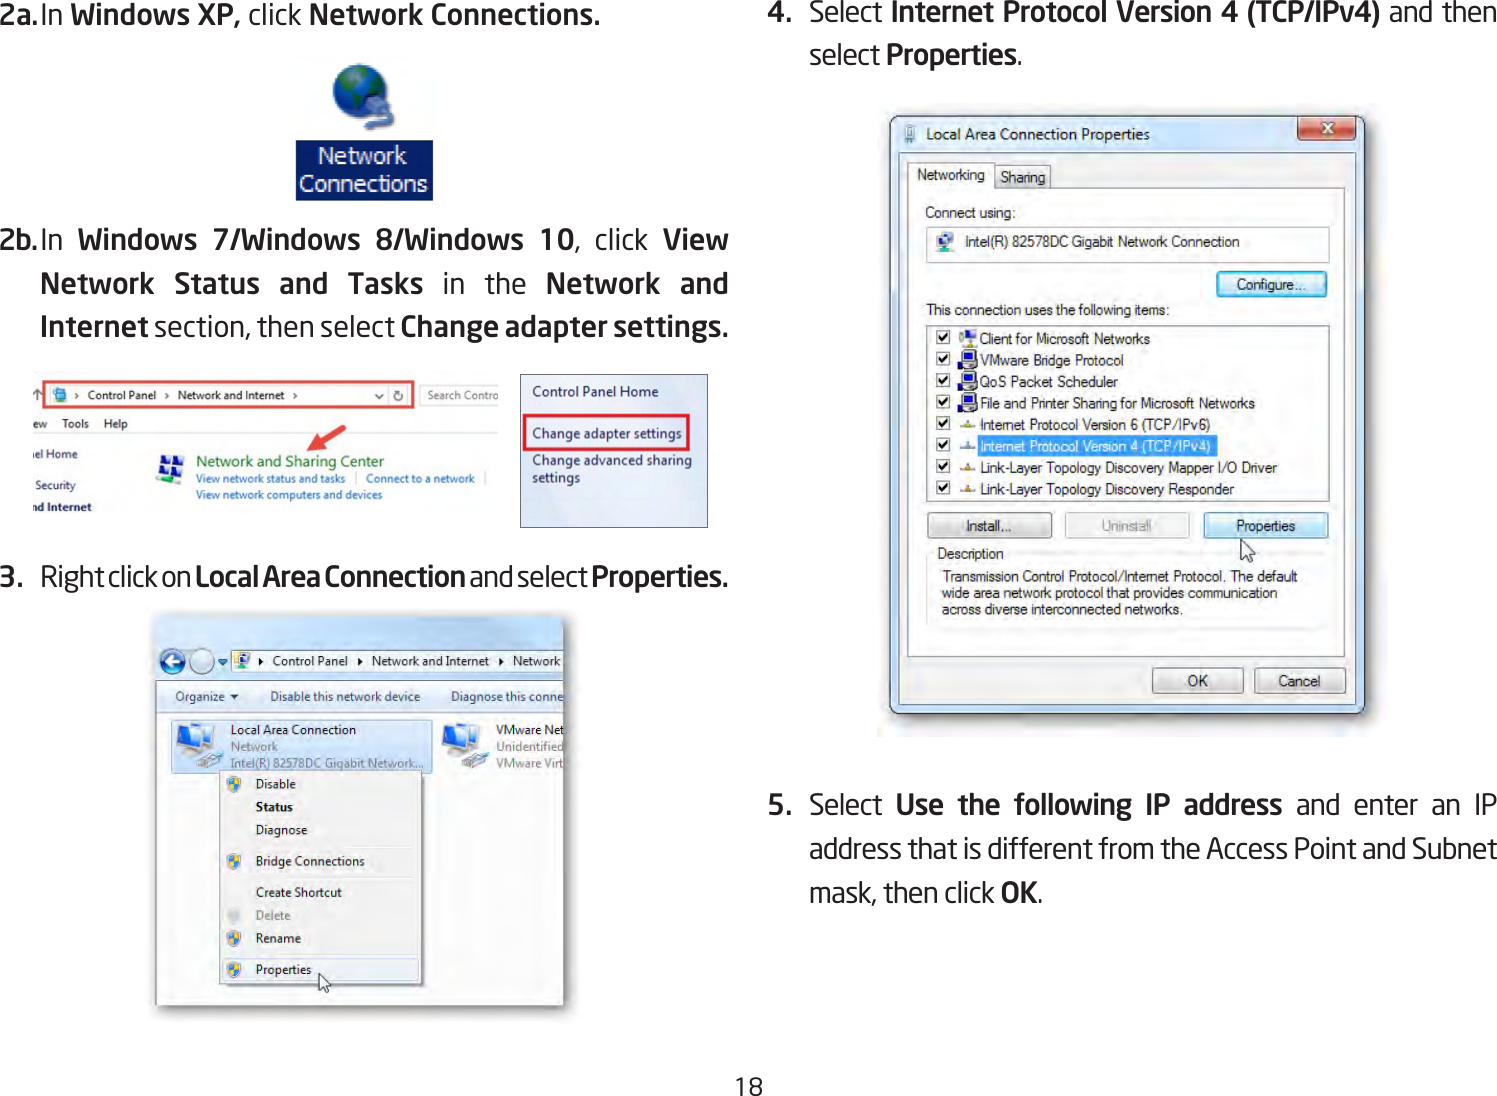 182a. In Windows XP, click Network Connections. 2b. In  Windows 7/Windows 8/Windows 10, click View Network Status and Tasks in the Network and Internet section, then select Change adapter settings.3.  Right click on Local Area Connection and select Properties.4.  Select Internet Protocol Version 4 (TCP/IPv4) and then select Properties.5.  Select  Use the following IP address and enter an IP address that is different from the Access Point and Subnet mask, then click OK.